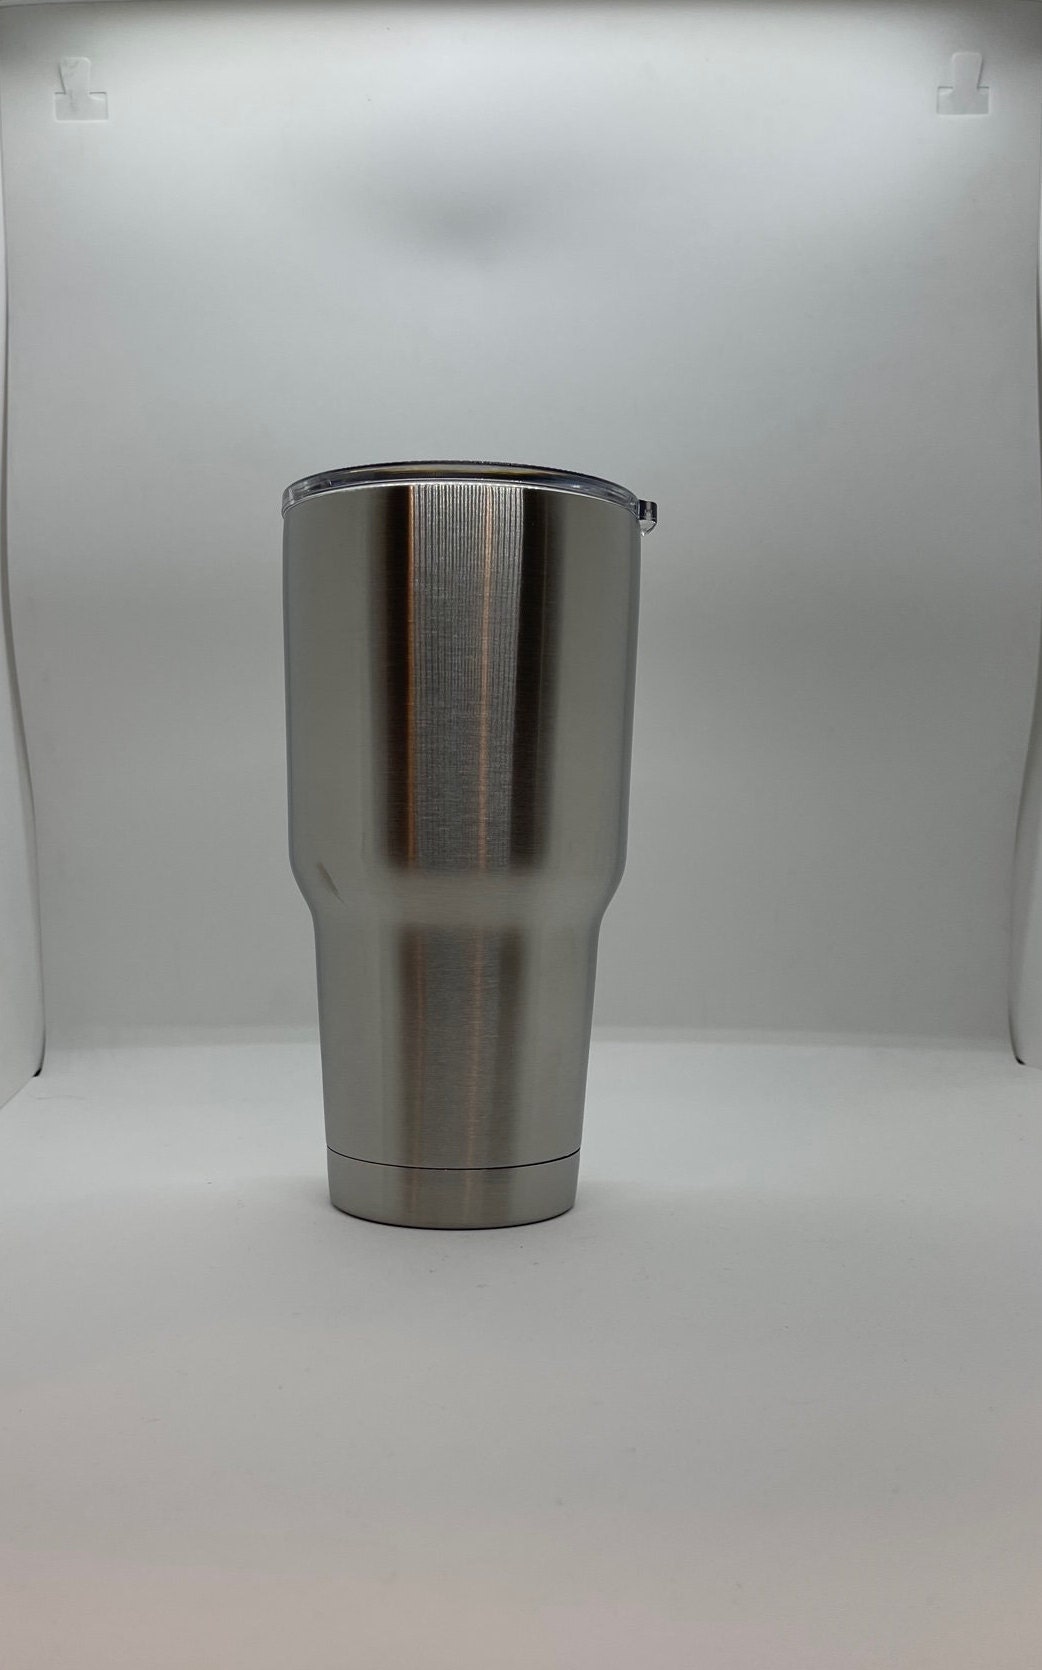 Gold Skinny Tumblers Bulk 20 oz Stainless Steel Double Wall Cup Mug